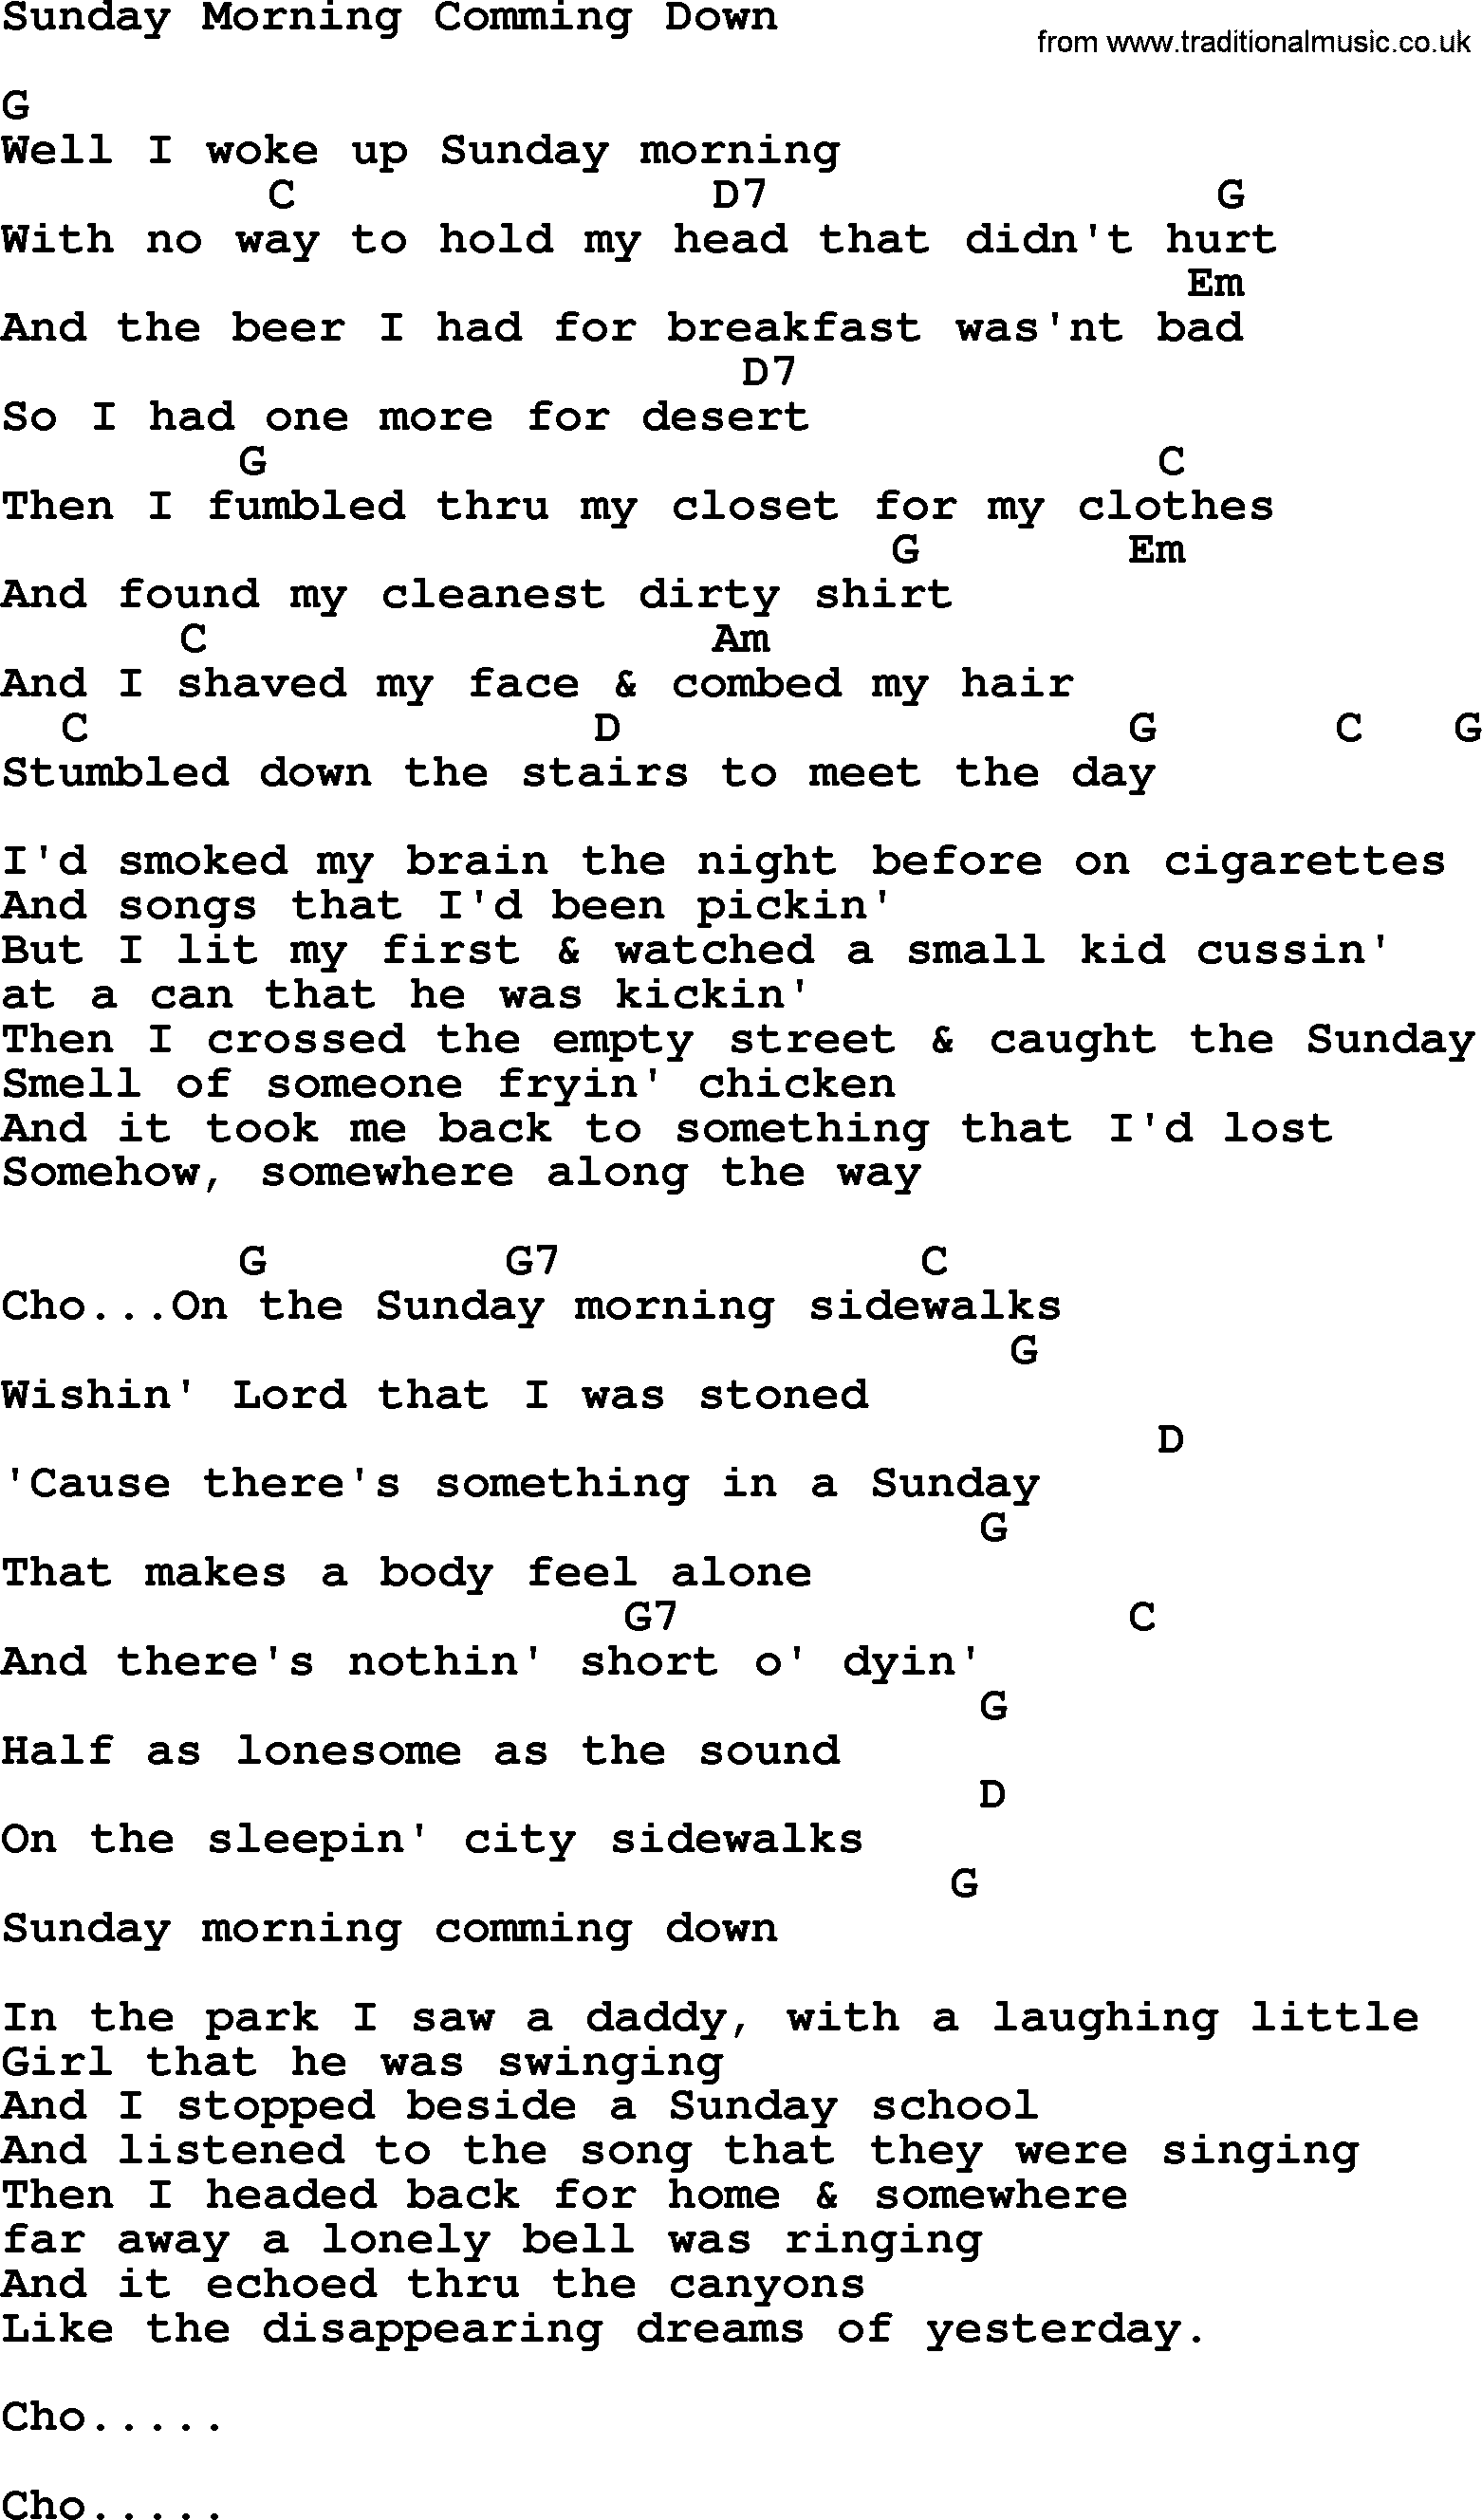 Kris Kristofferson song: Sunday Morning Comming Down lyrics and chords